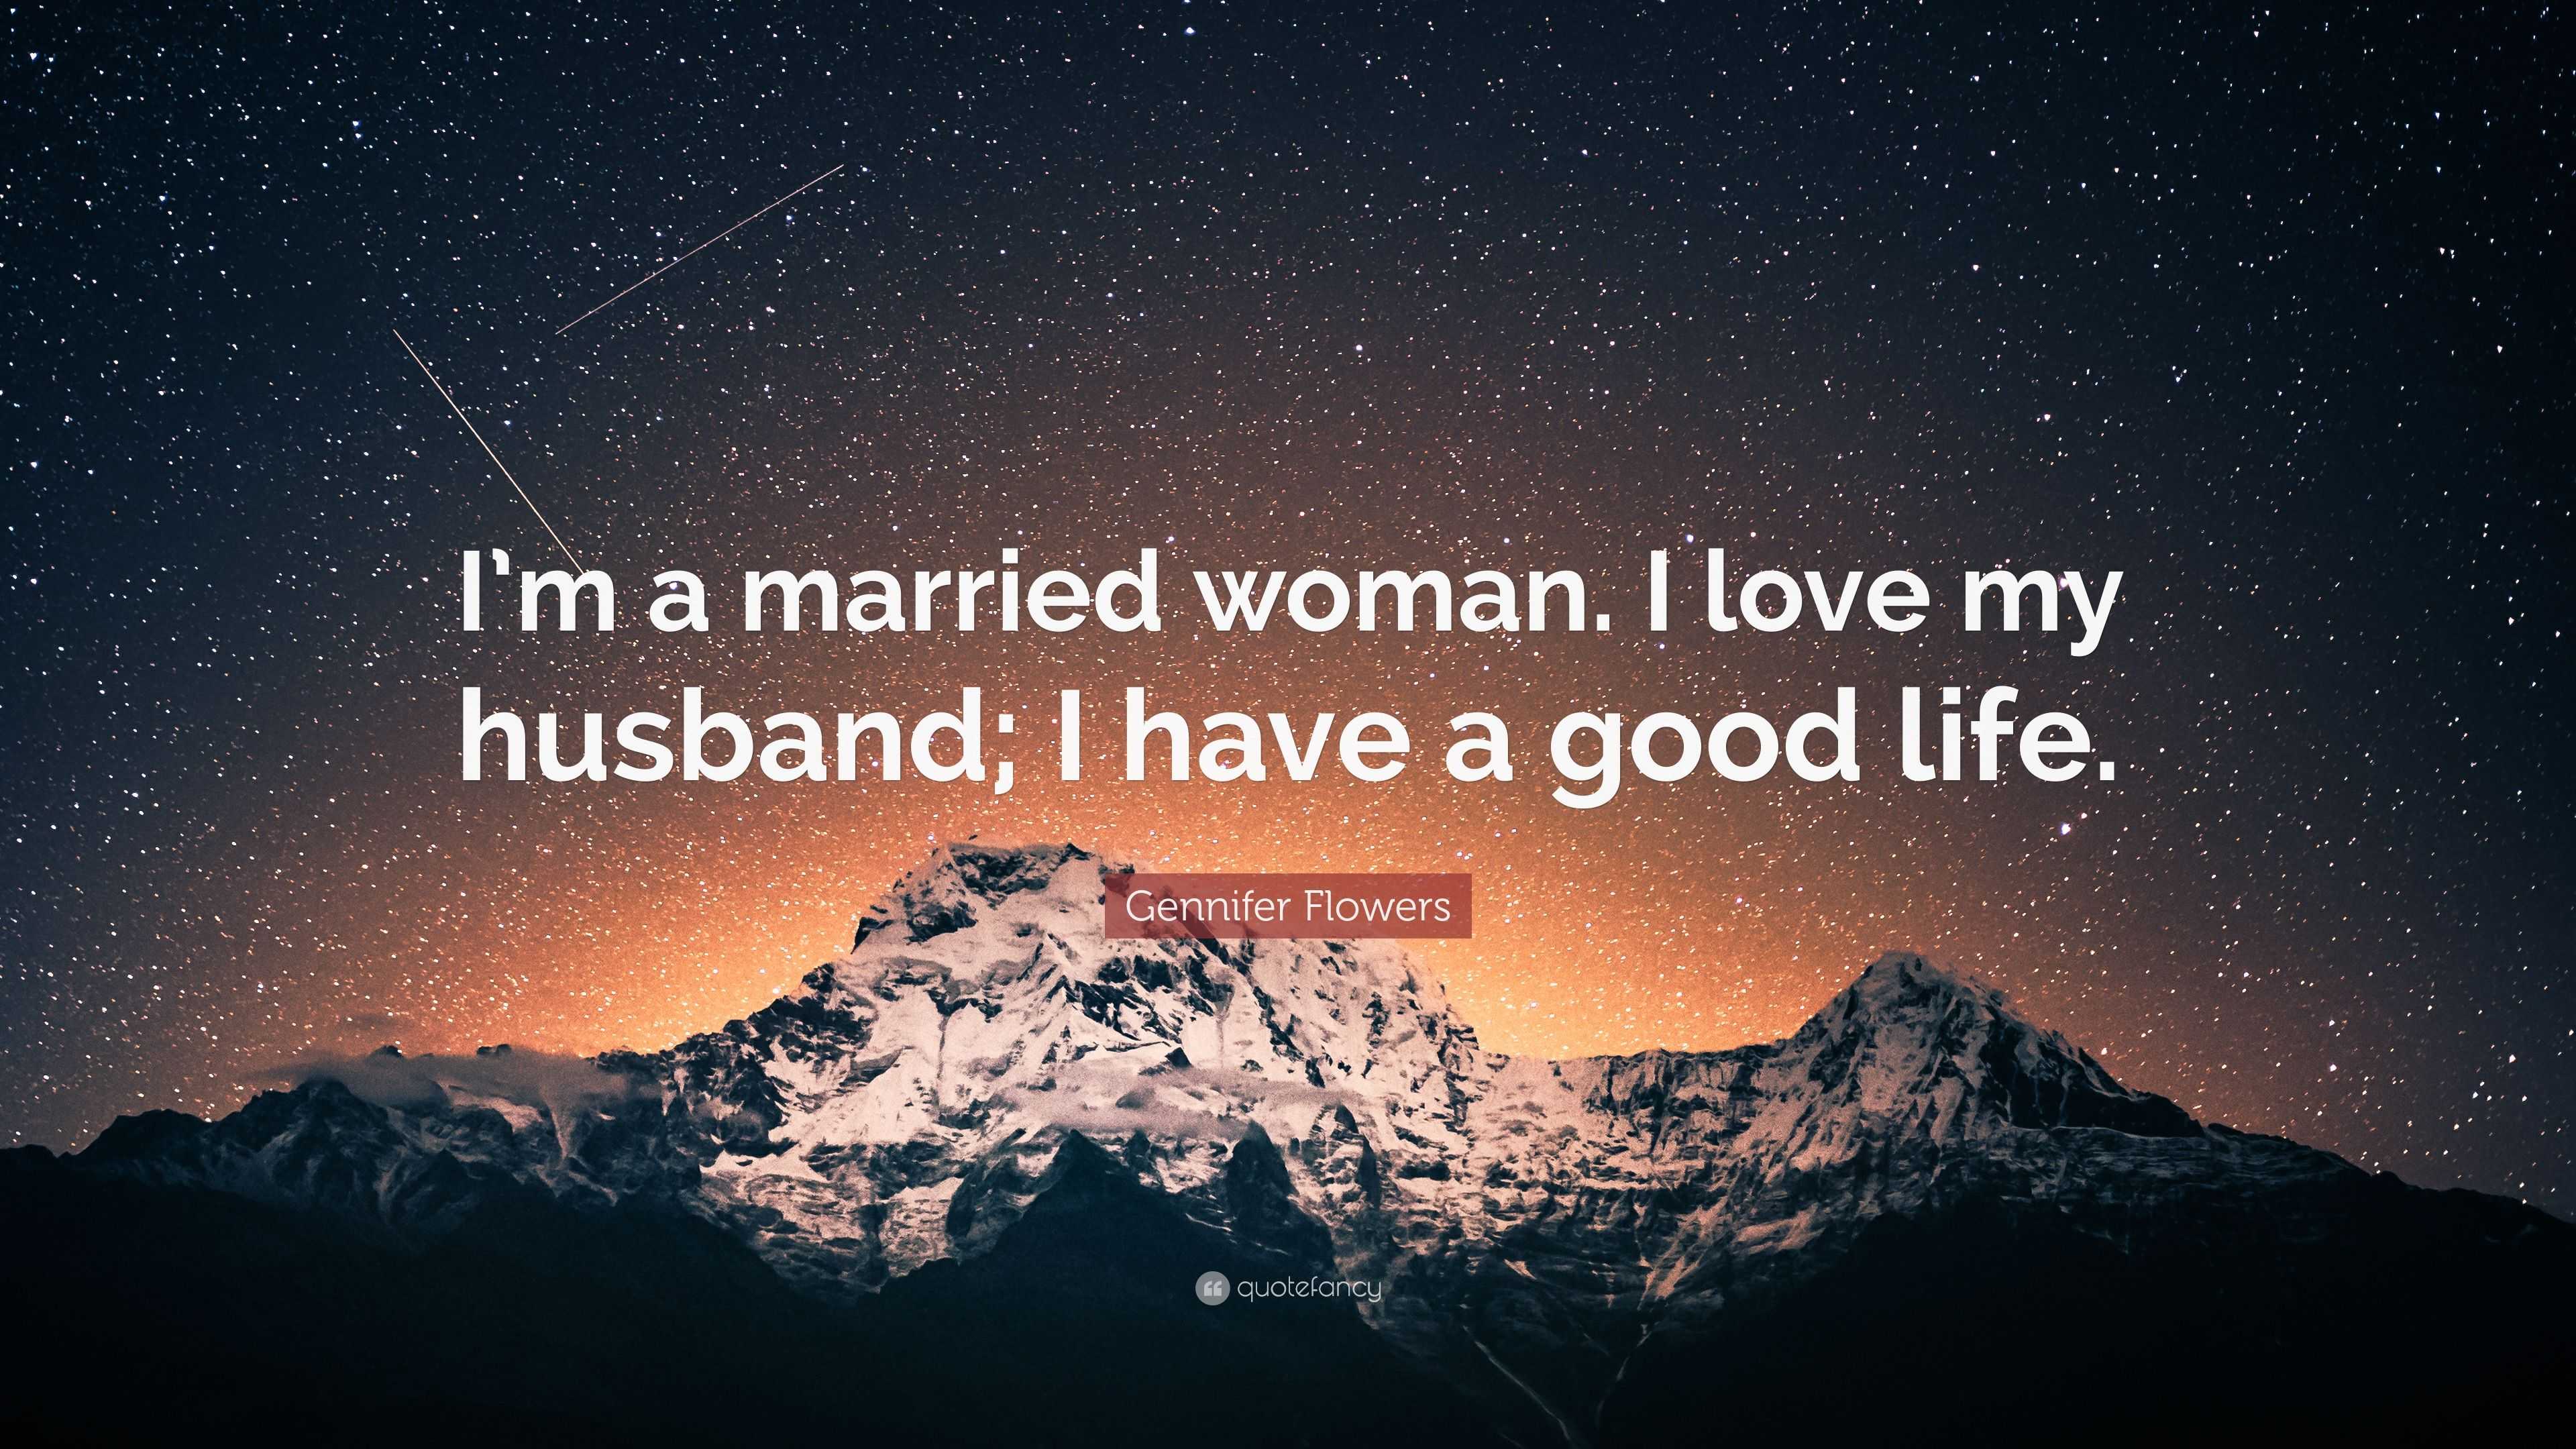 Gennifer Flowers Quote: “I’m a married woman. I love my husband; I have ...